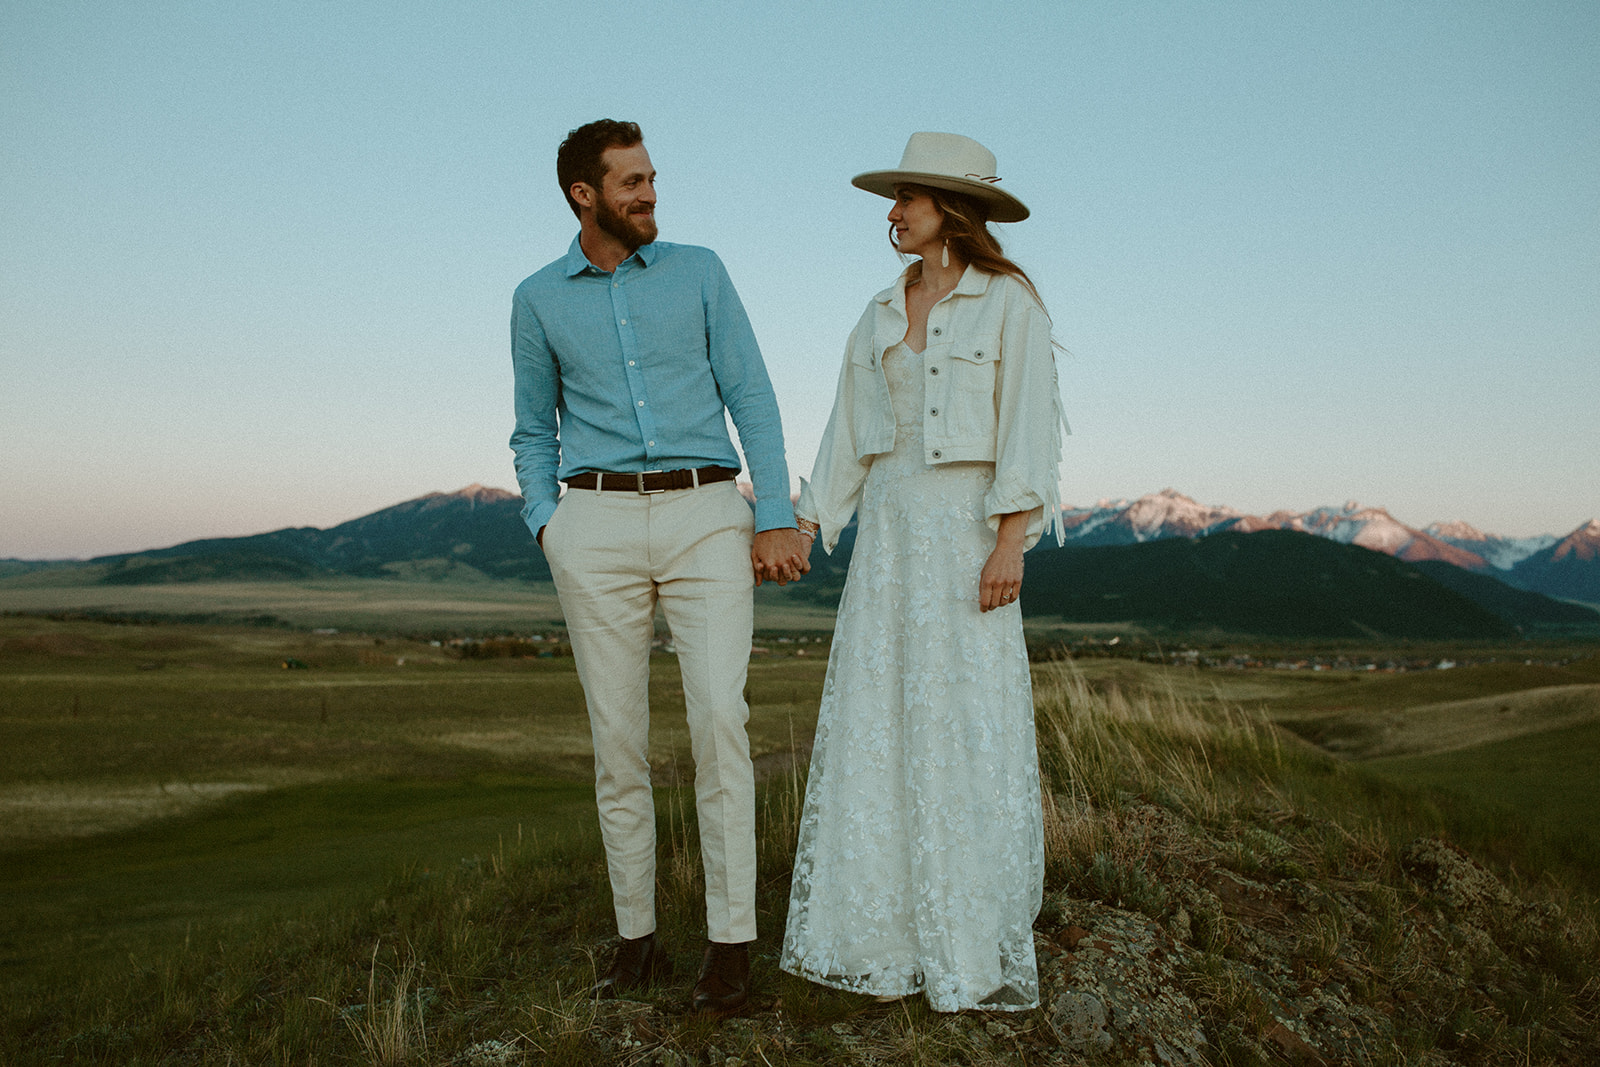 A man and woman in wedding attire stand in a field holding hands with mountains and a sunset in the background.